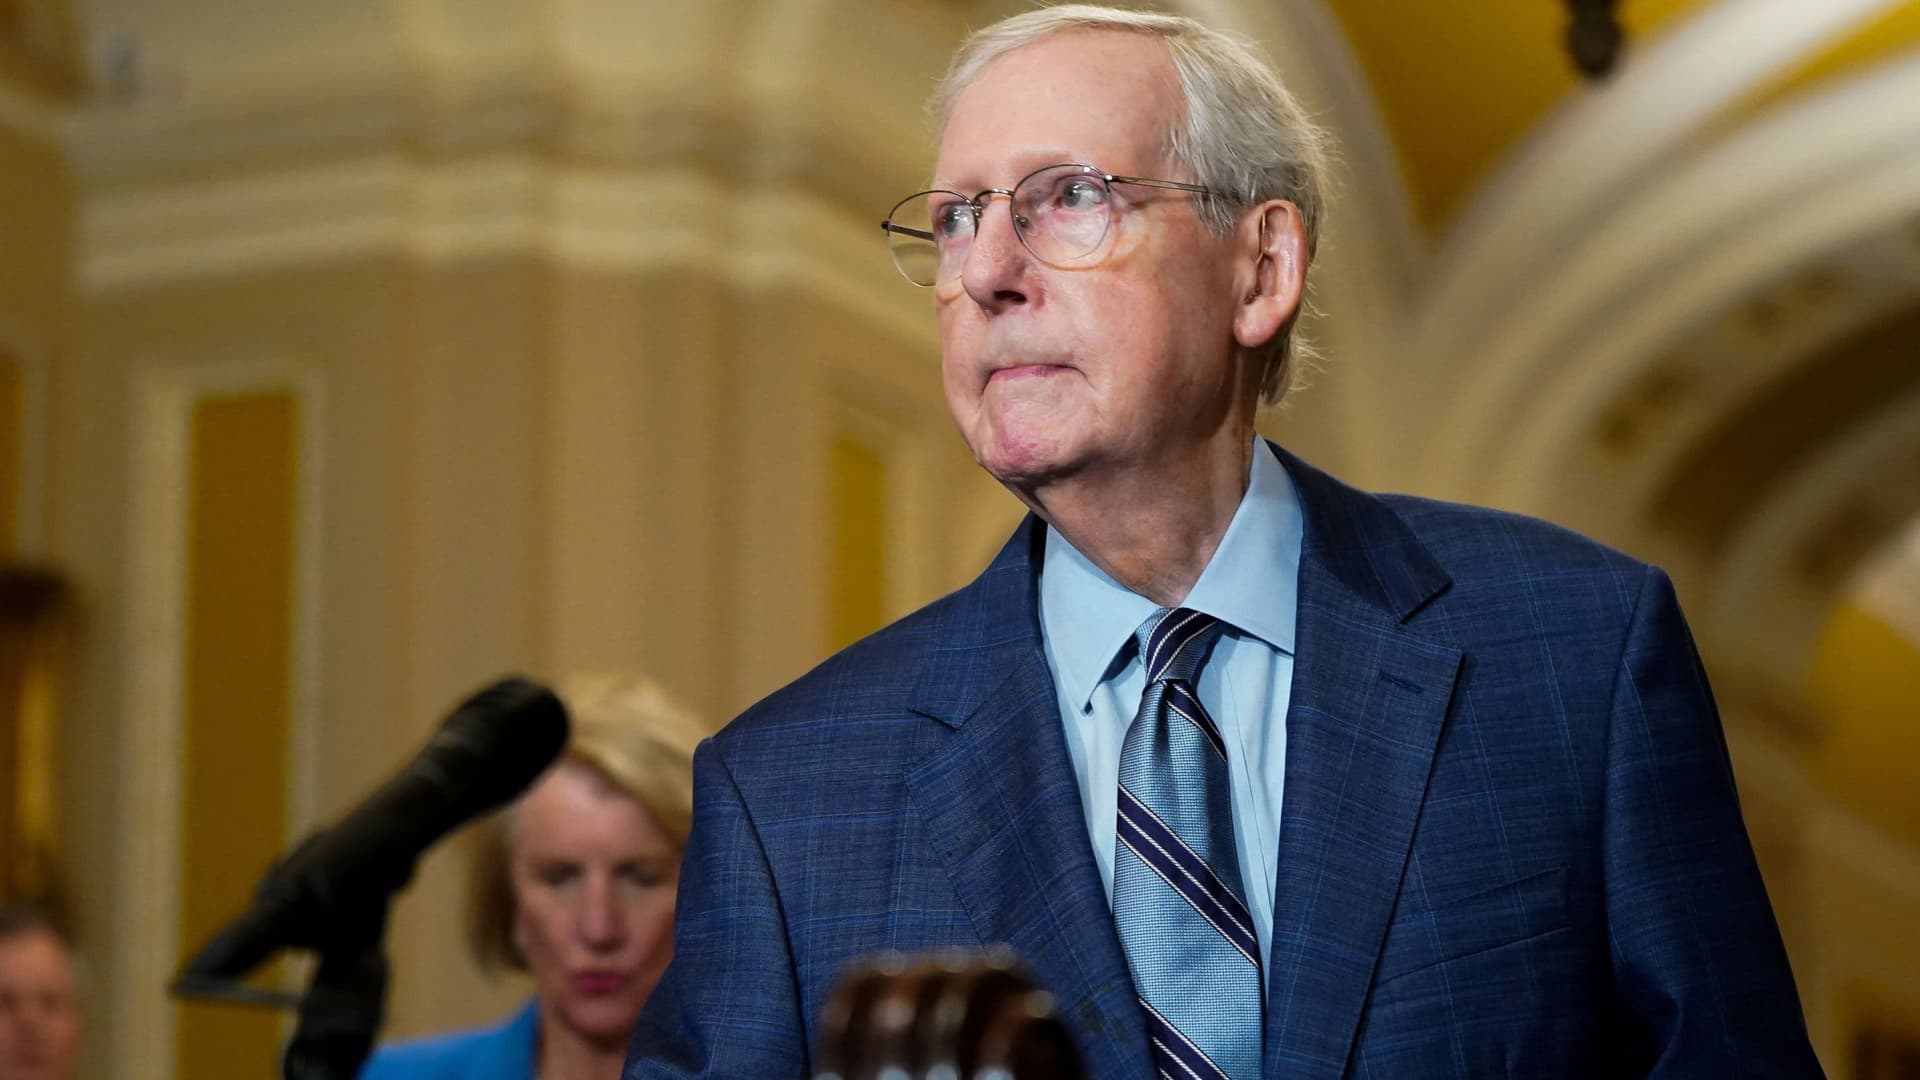 Mitch McConnell to step down as Republican Senate leader in November